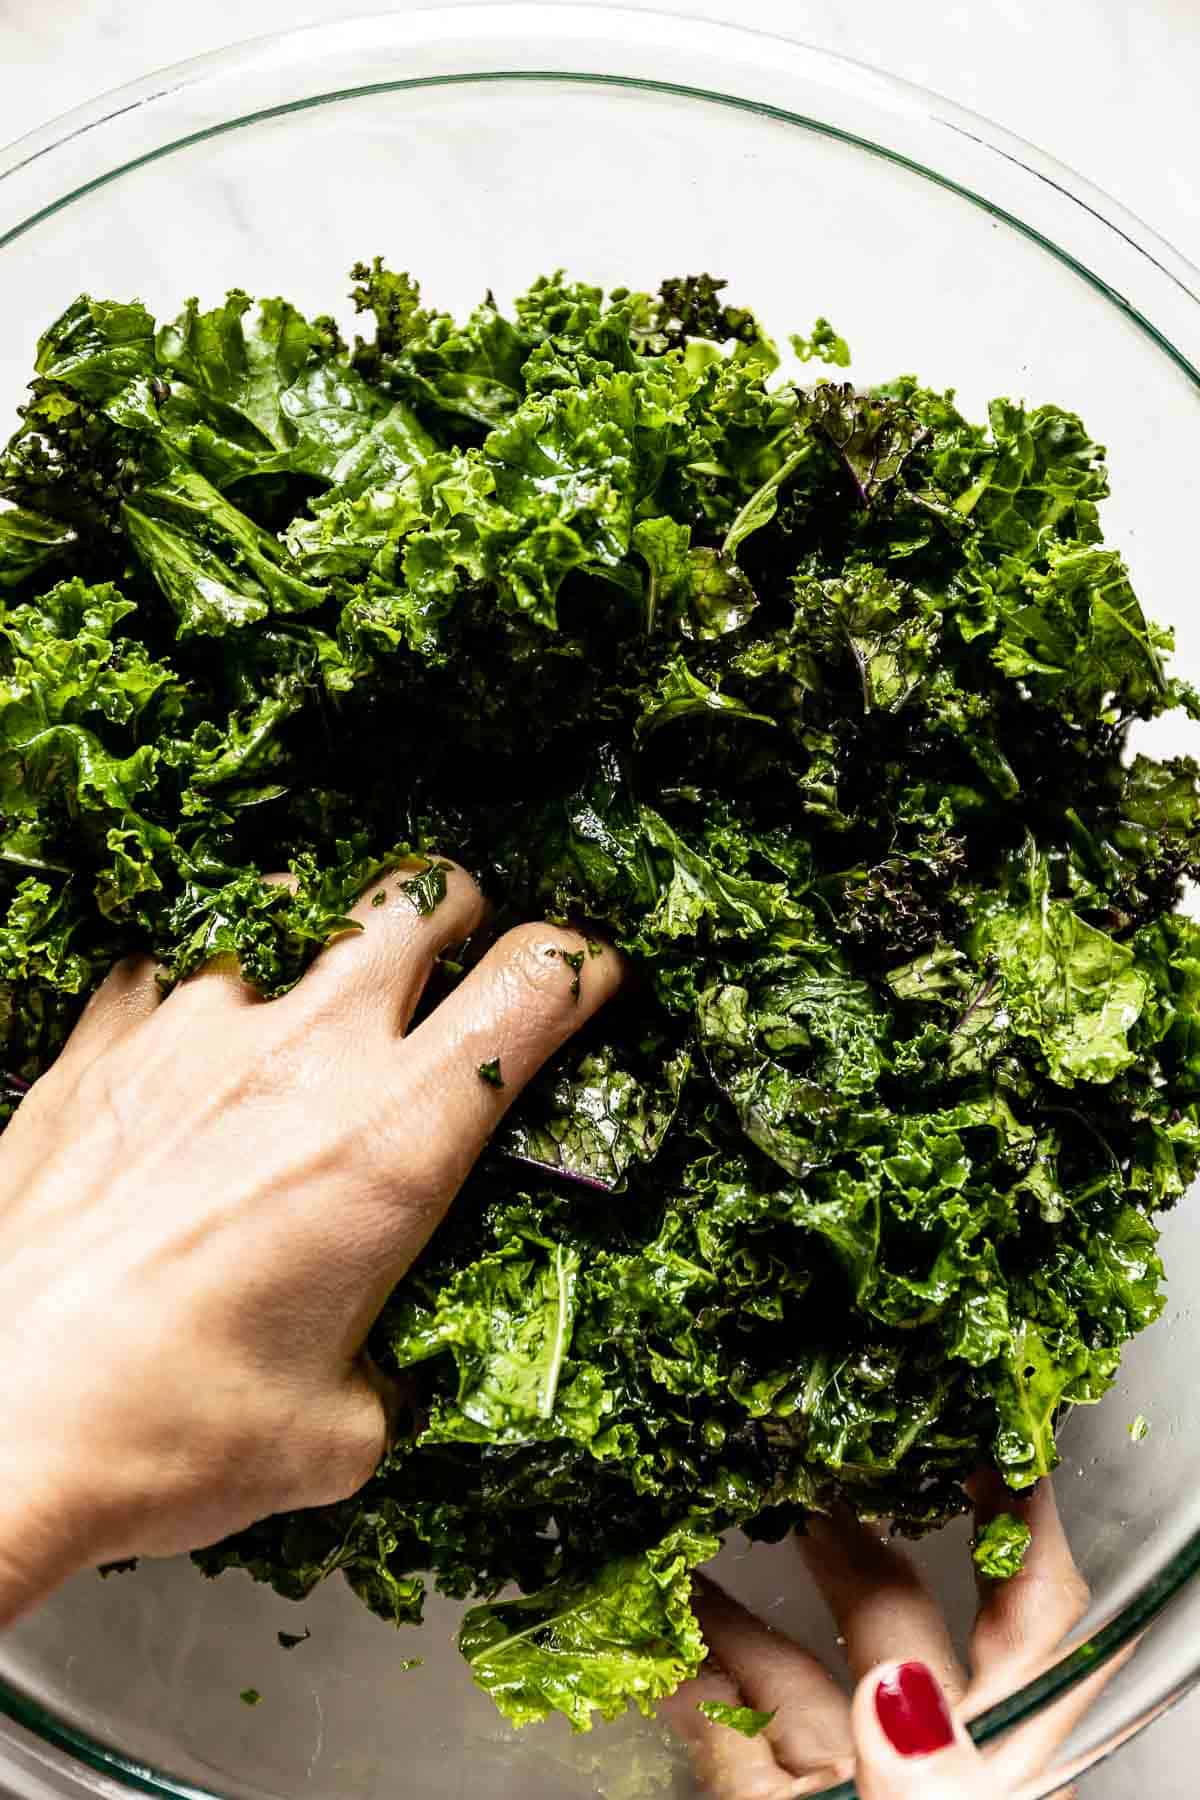 A person massaging kale with oil in a bowl from the top view.